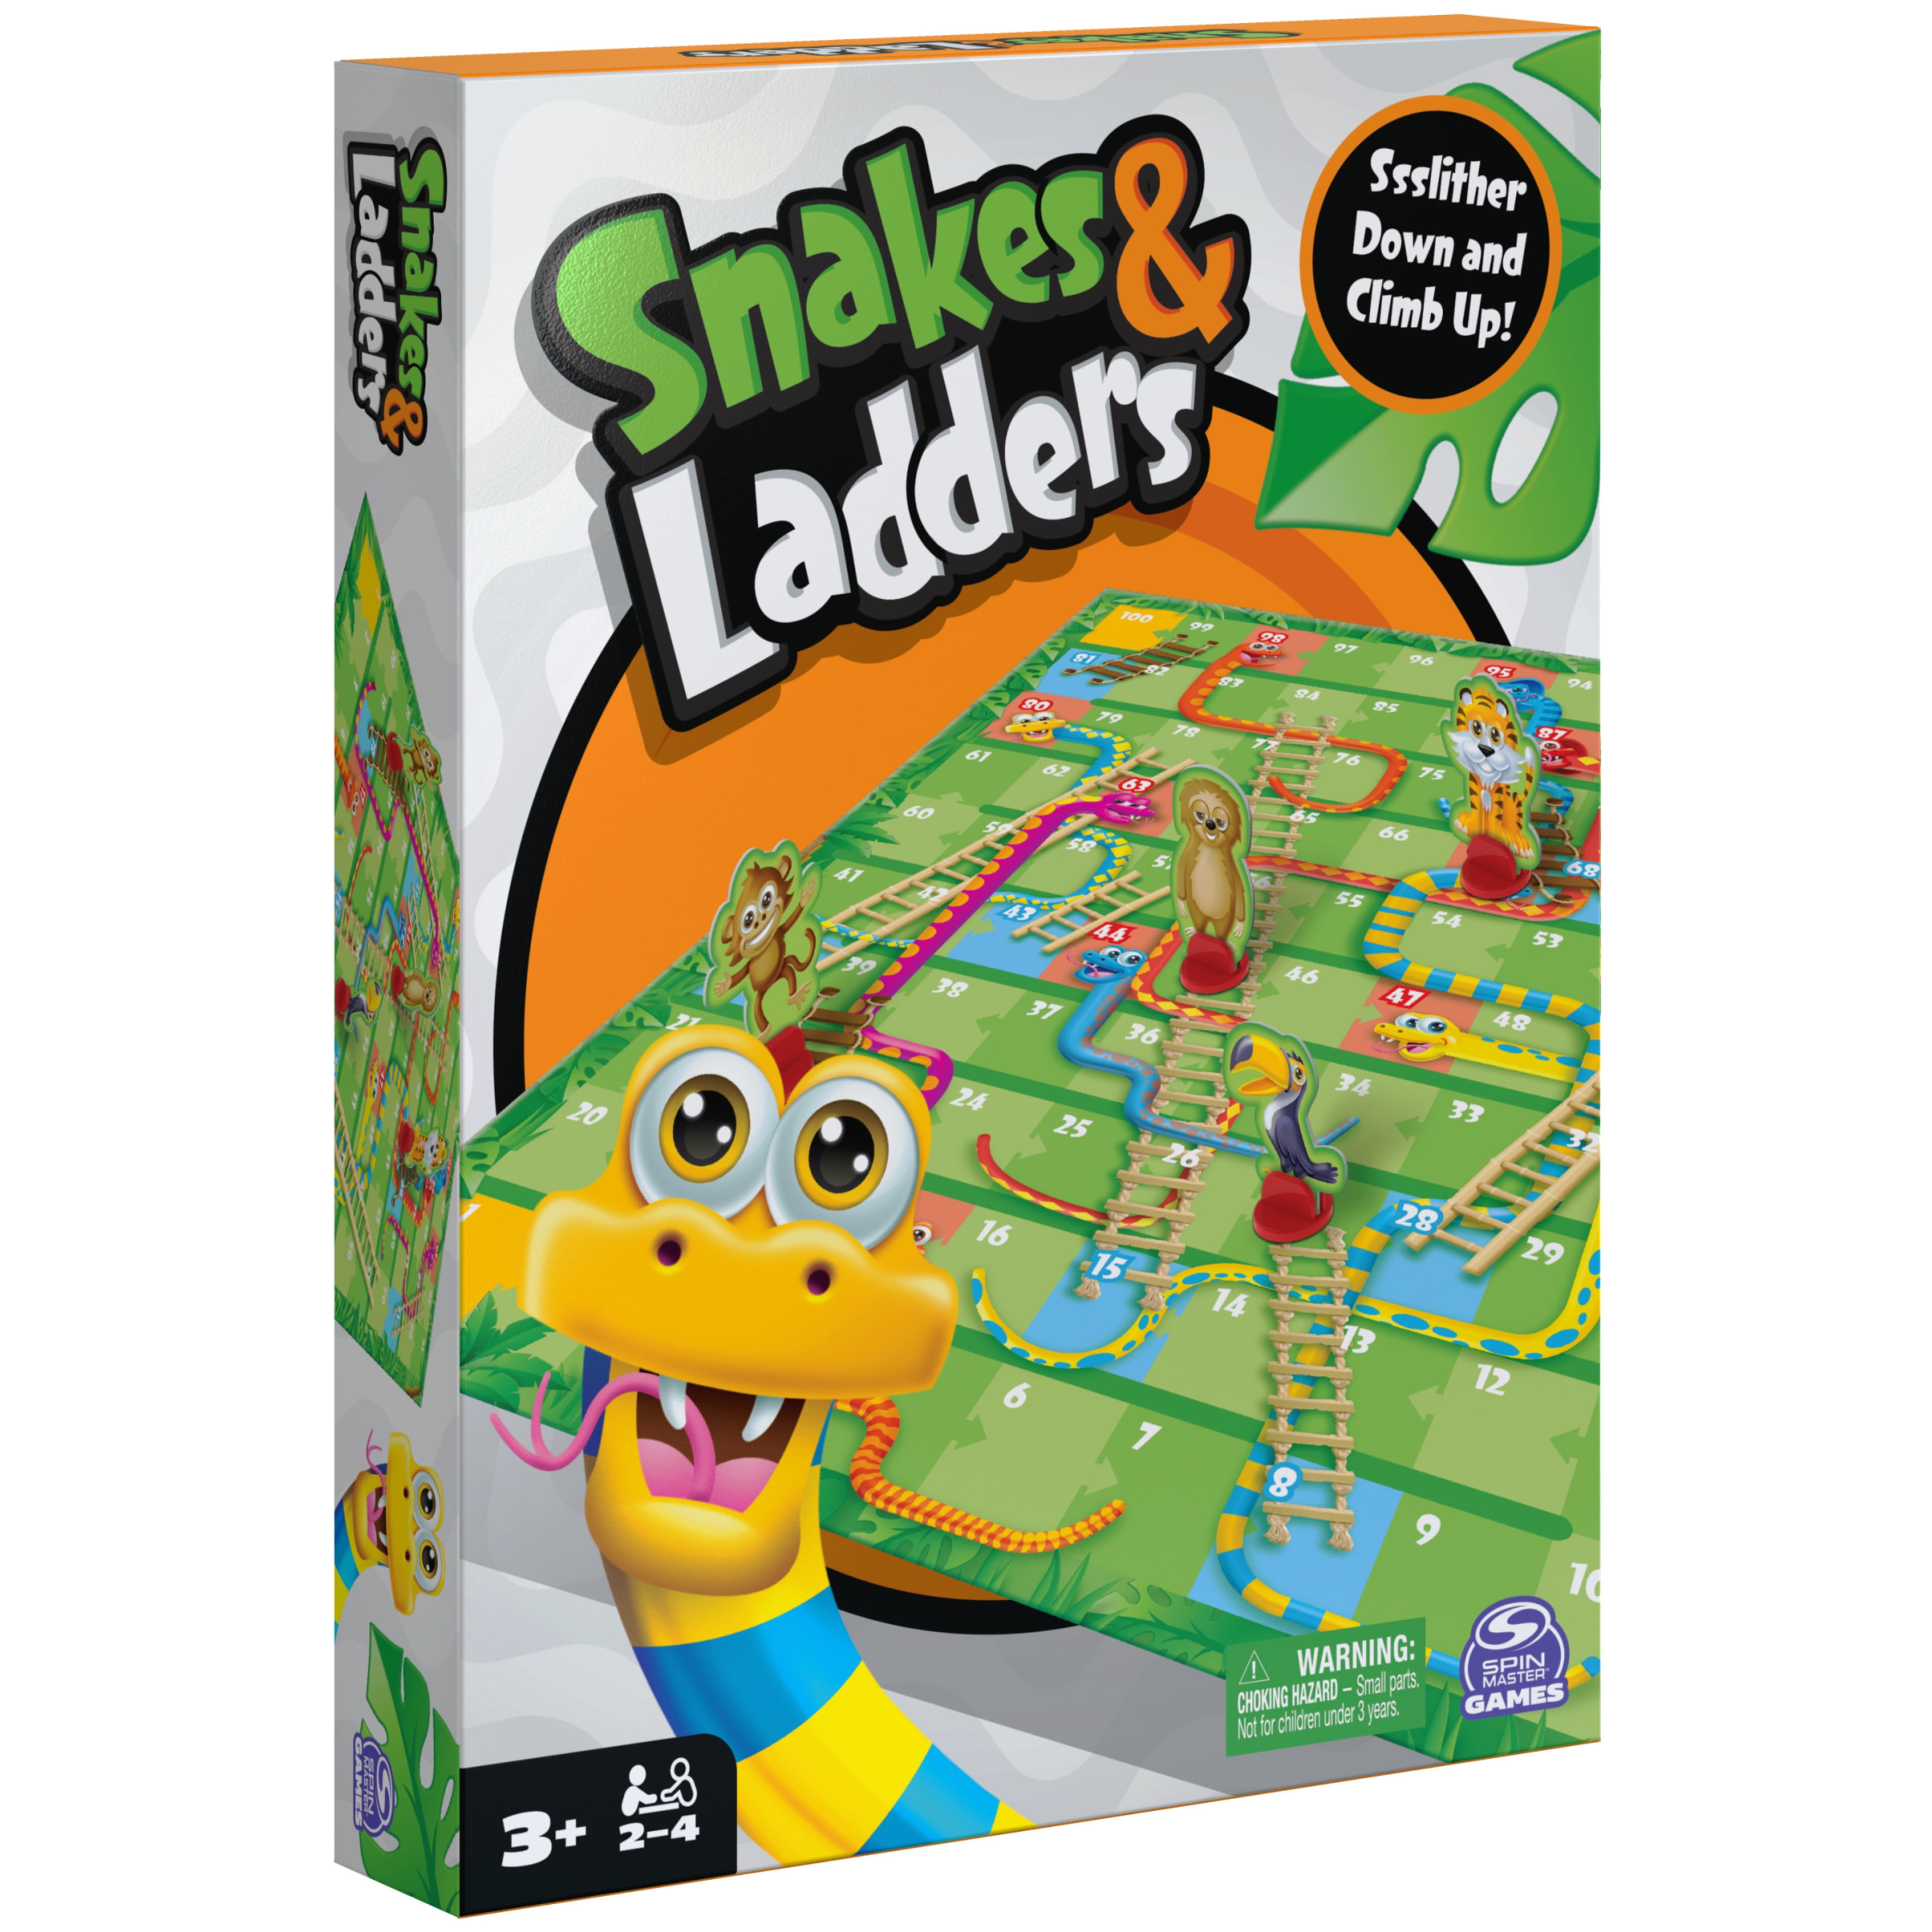 Snakes Ladders Board Game, Board Games Family, Adult Snake Ladder